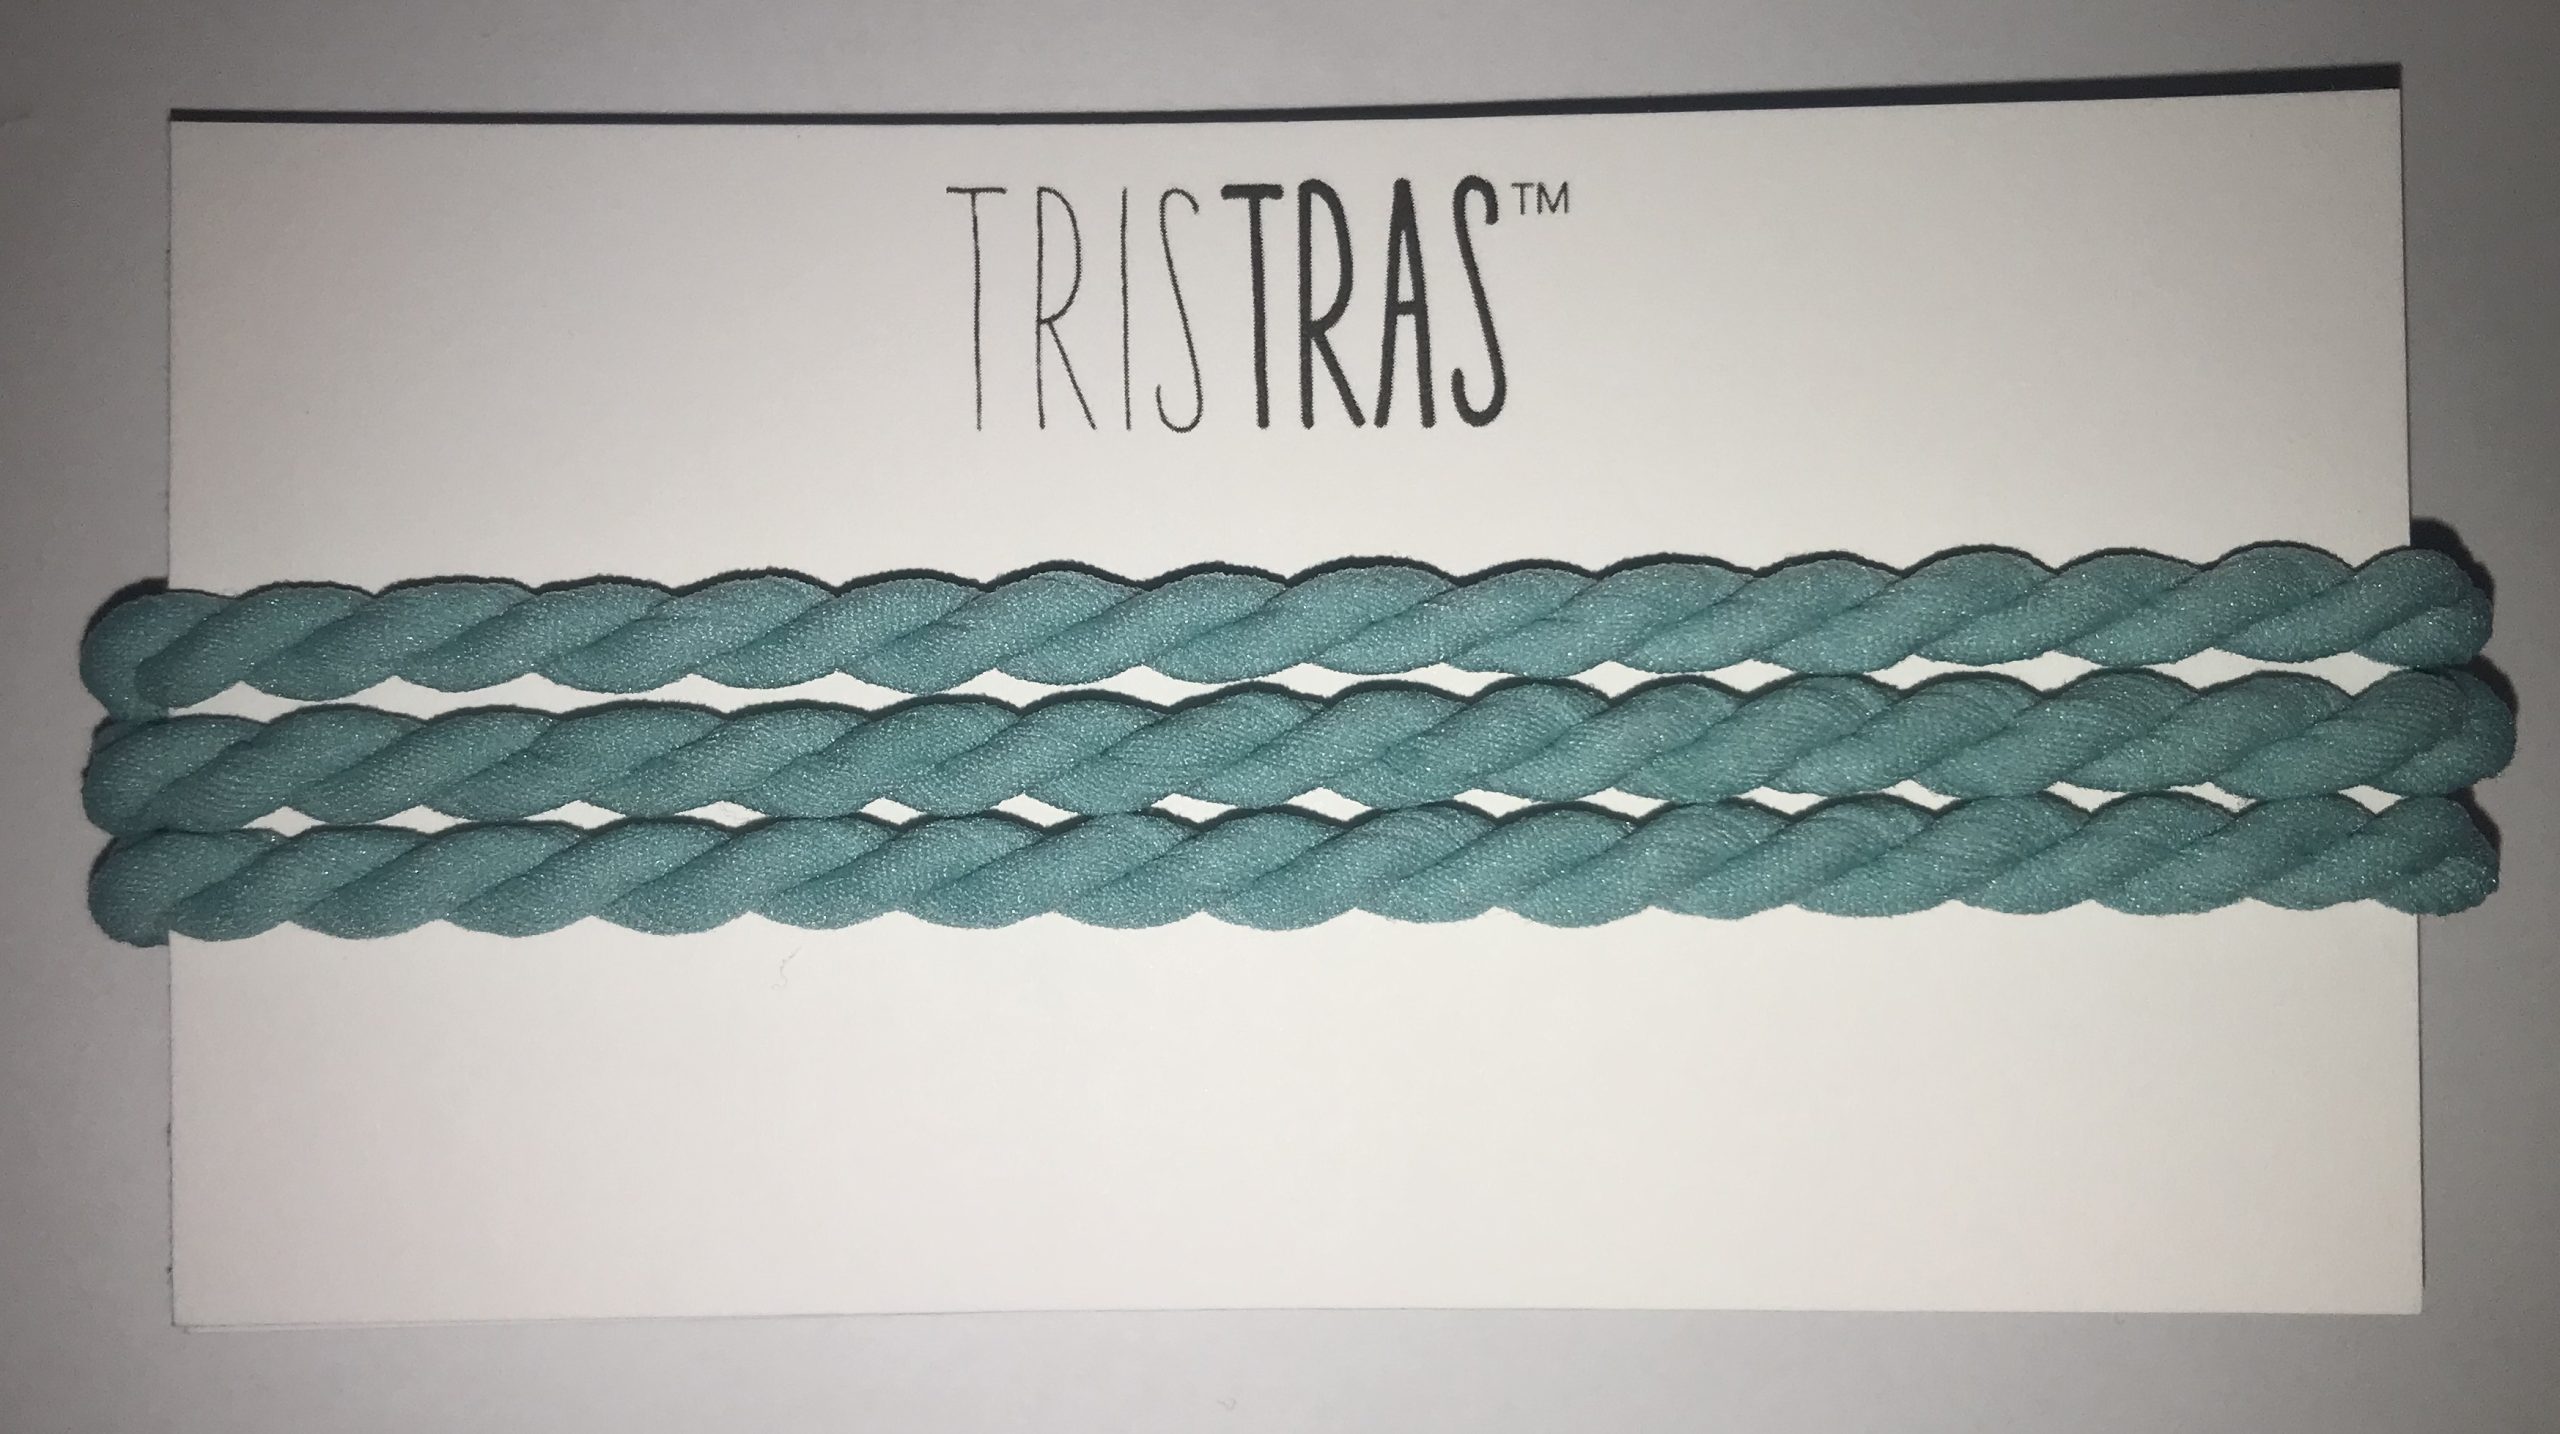 Featured image for “TrisTras set 15”